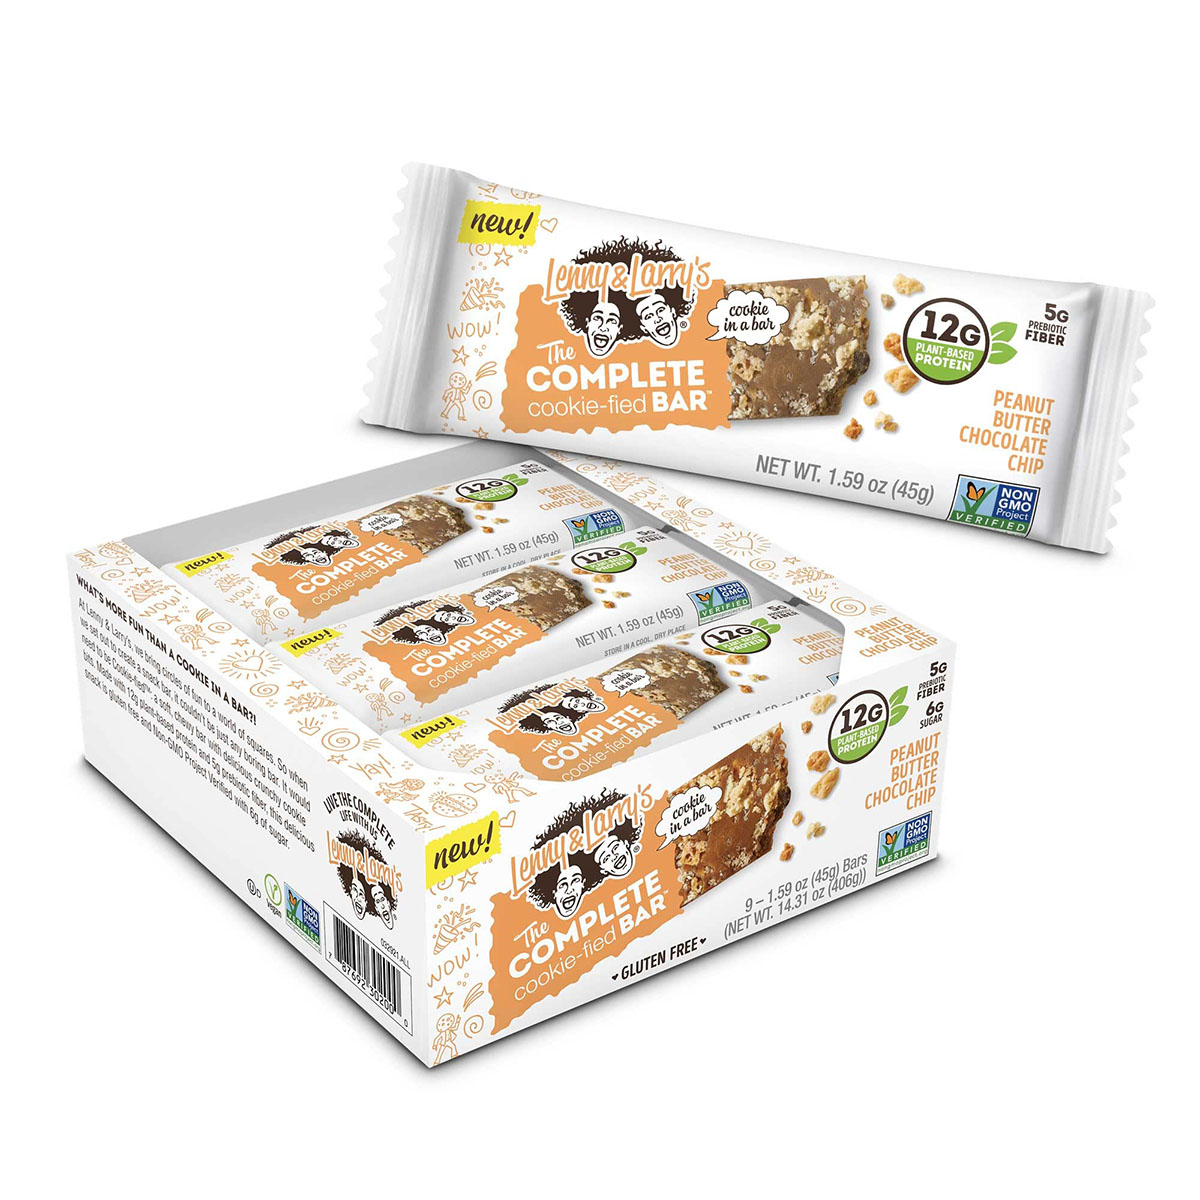 Lenny & Larry’s The Complete Cookie-fied Bar Peanut Butter Chocolate Chip Box of 9 Bars